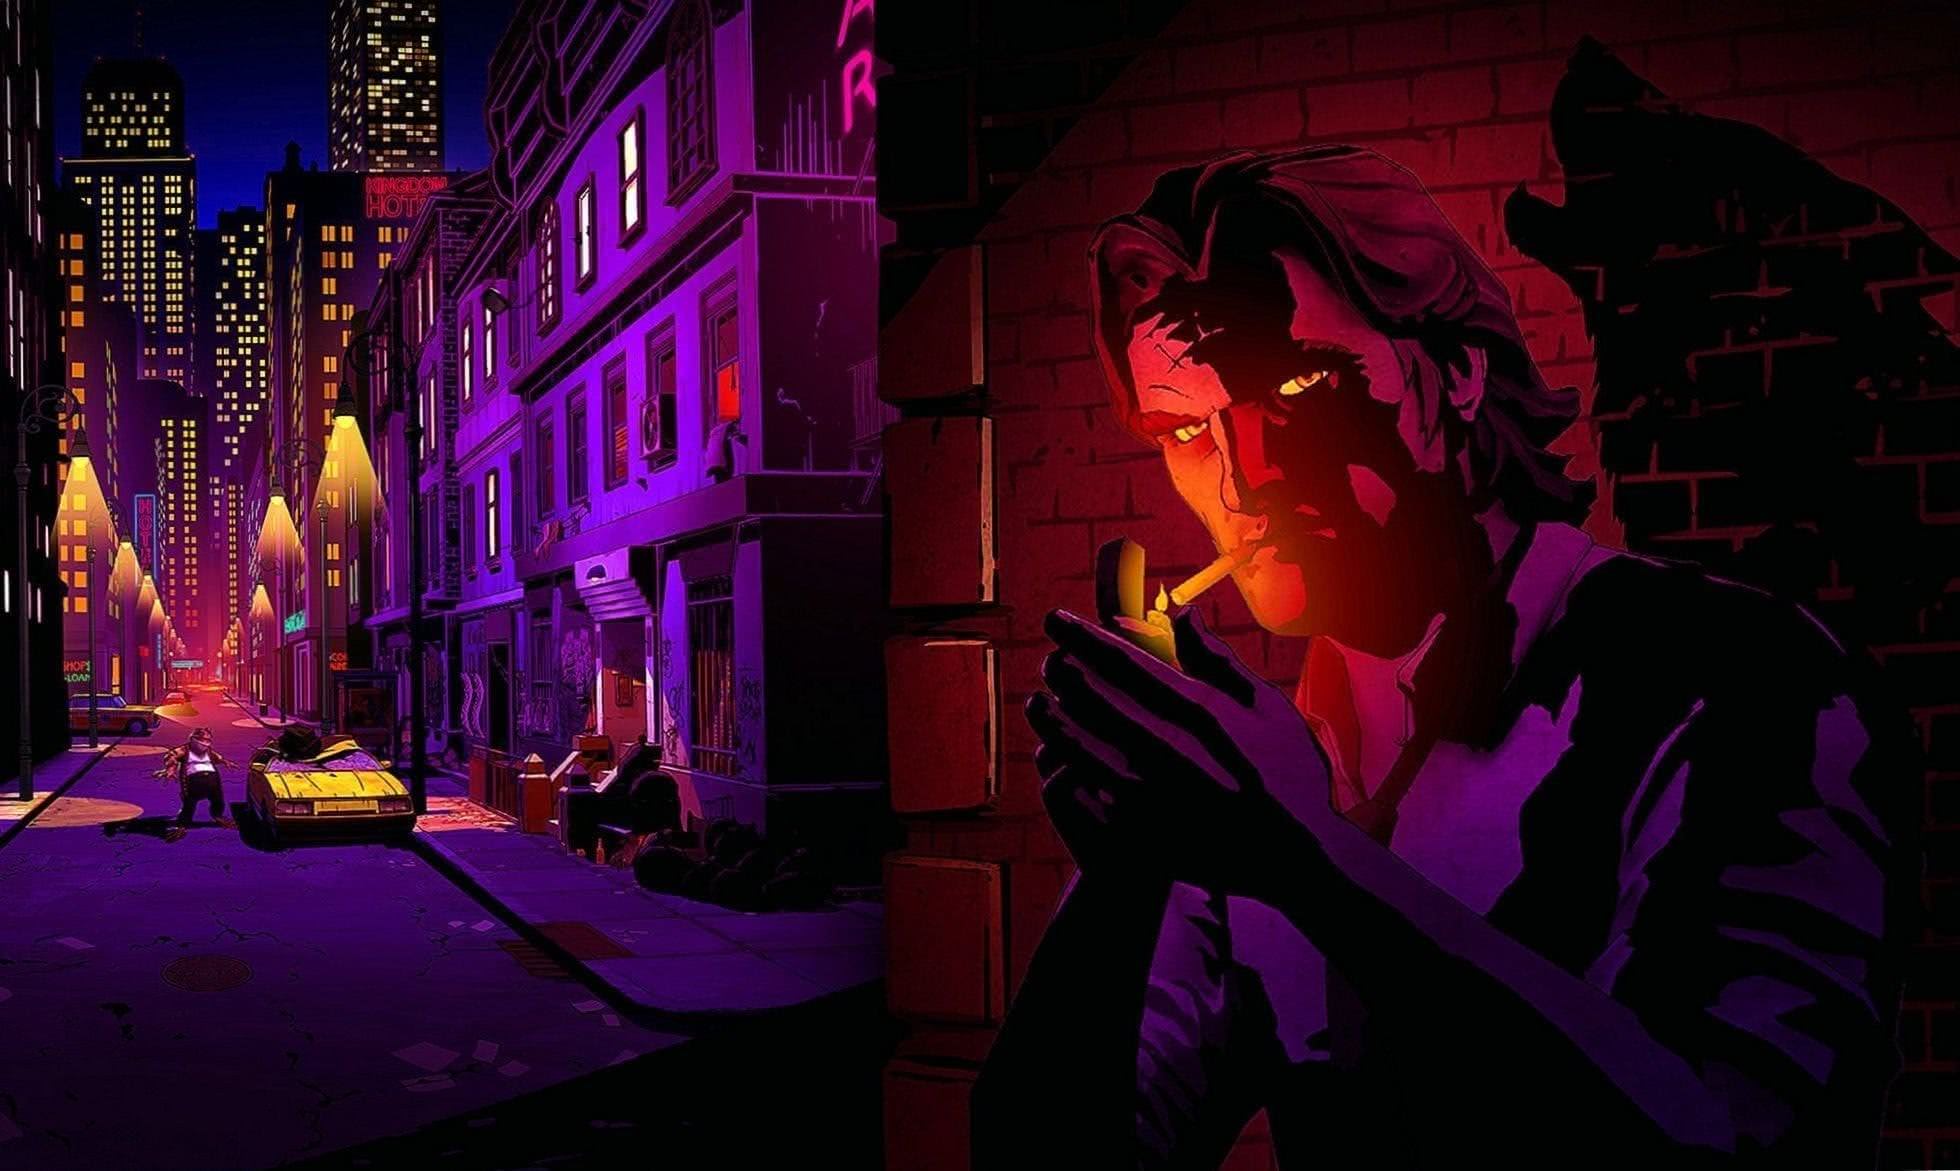 The Wolf Among Us Wallpapers